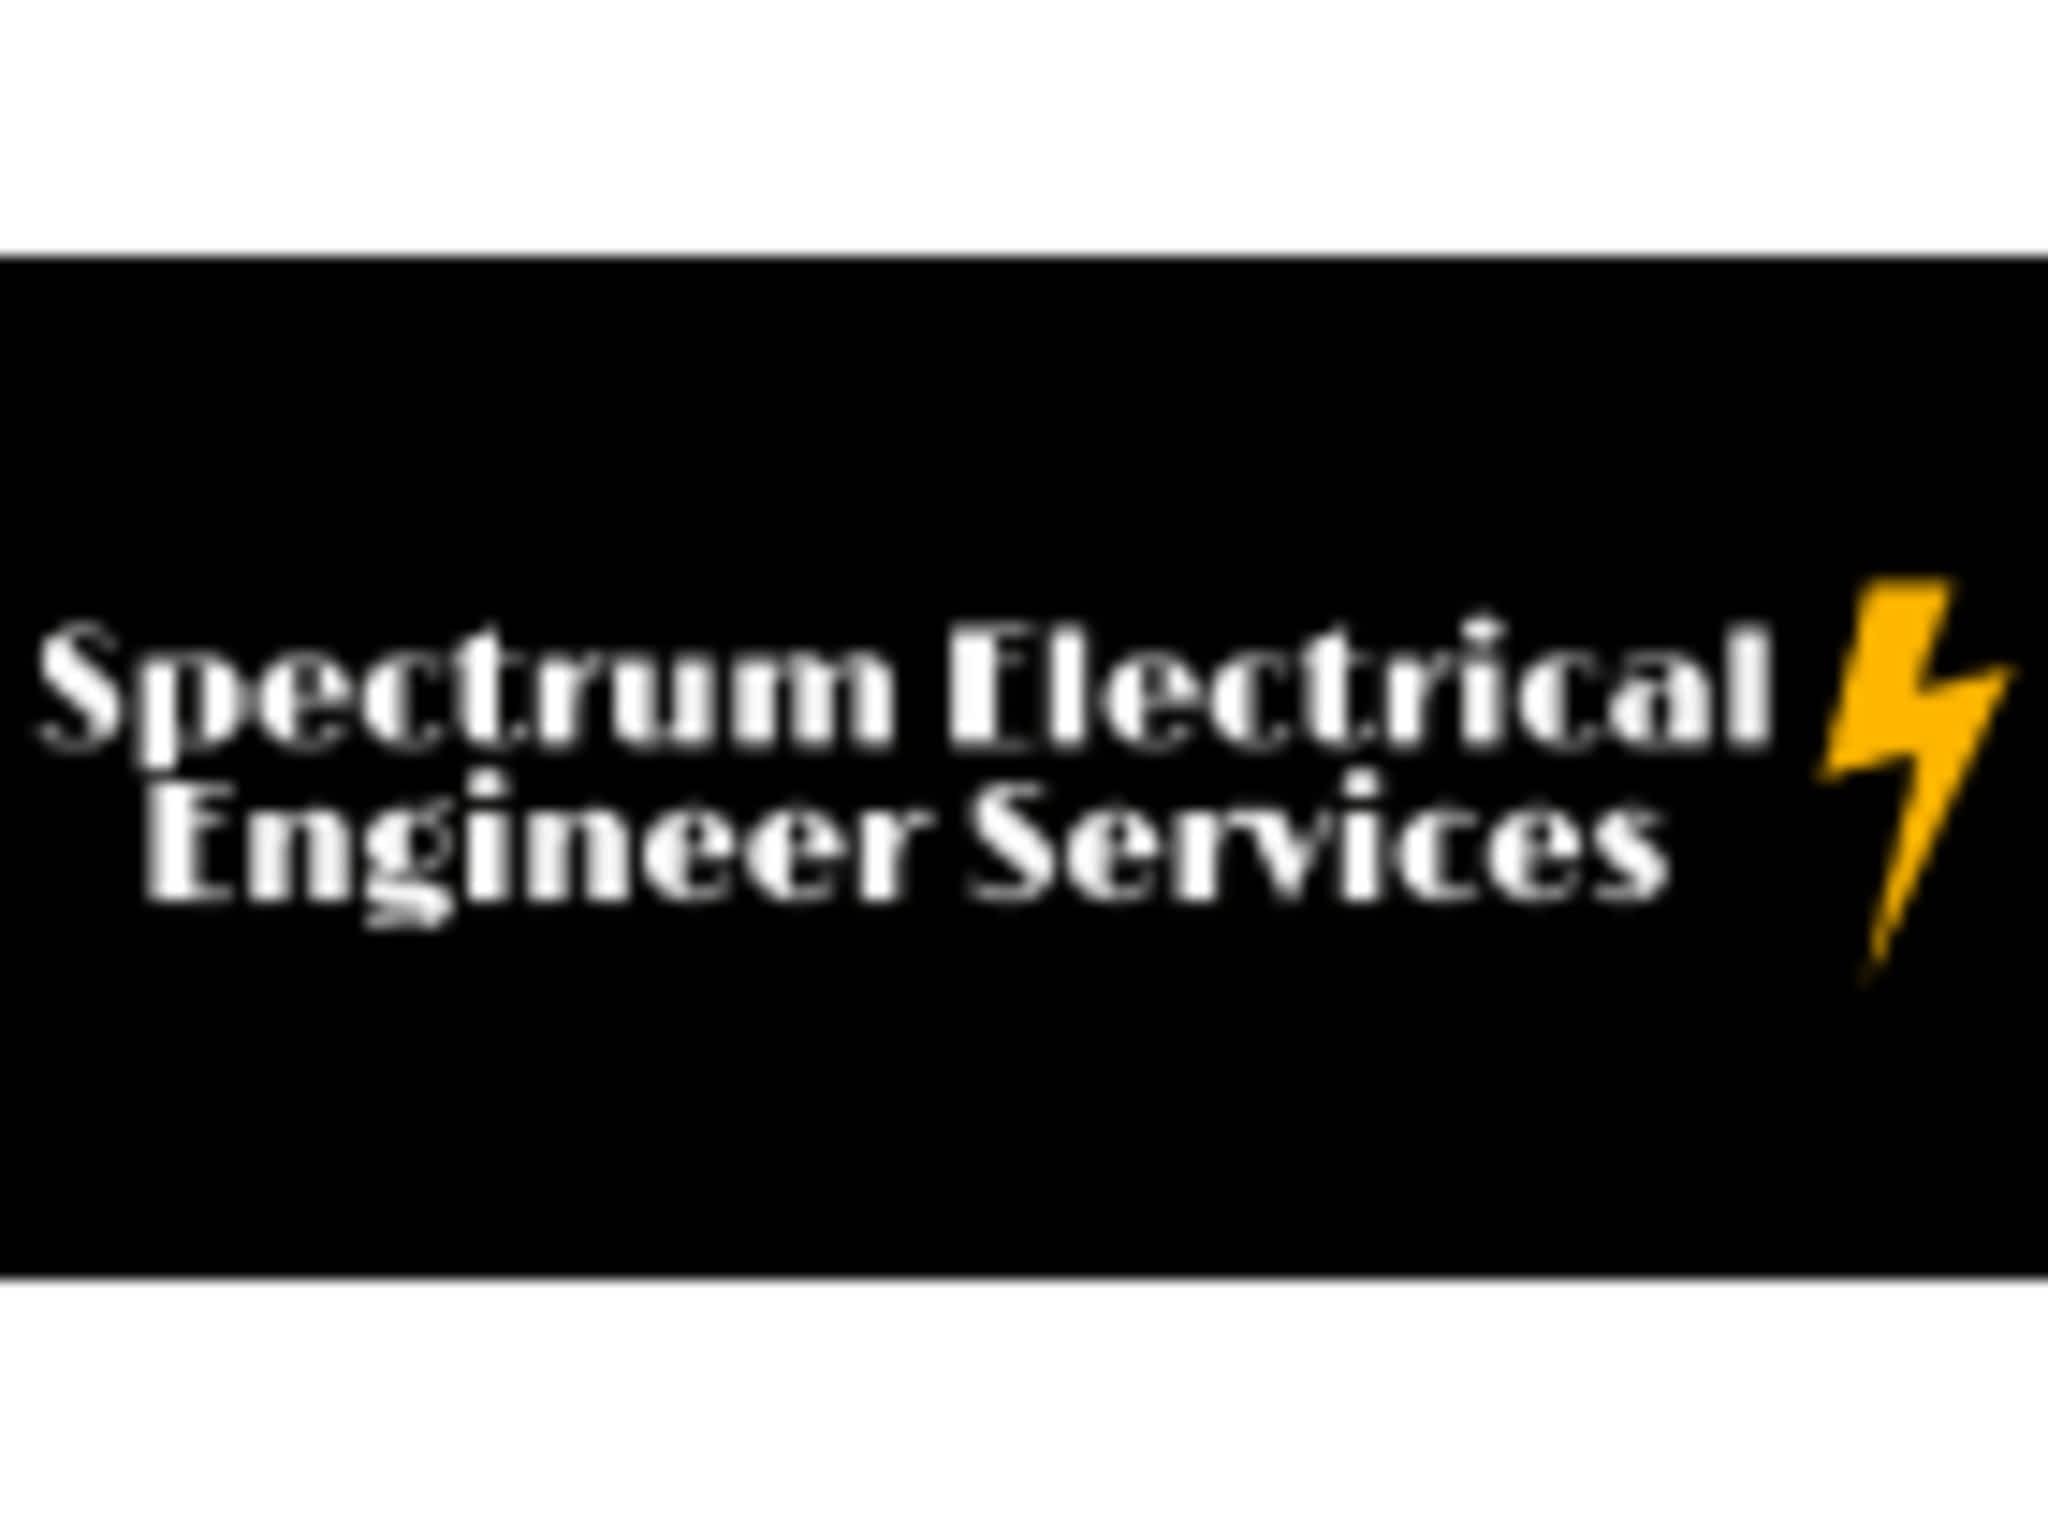 photo Spectrum Electrical Engineer Services